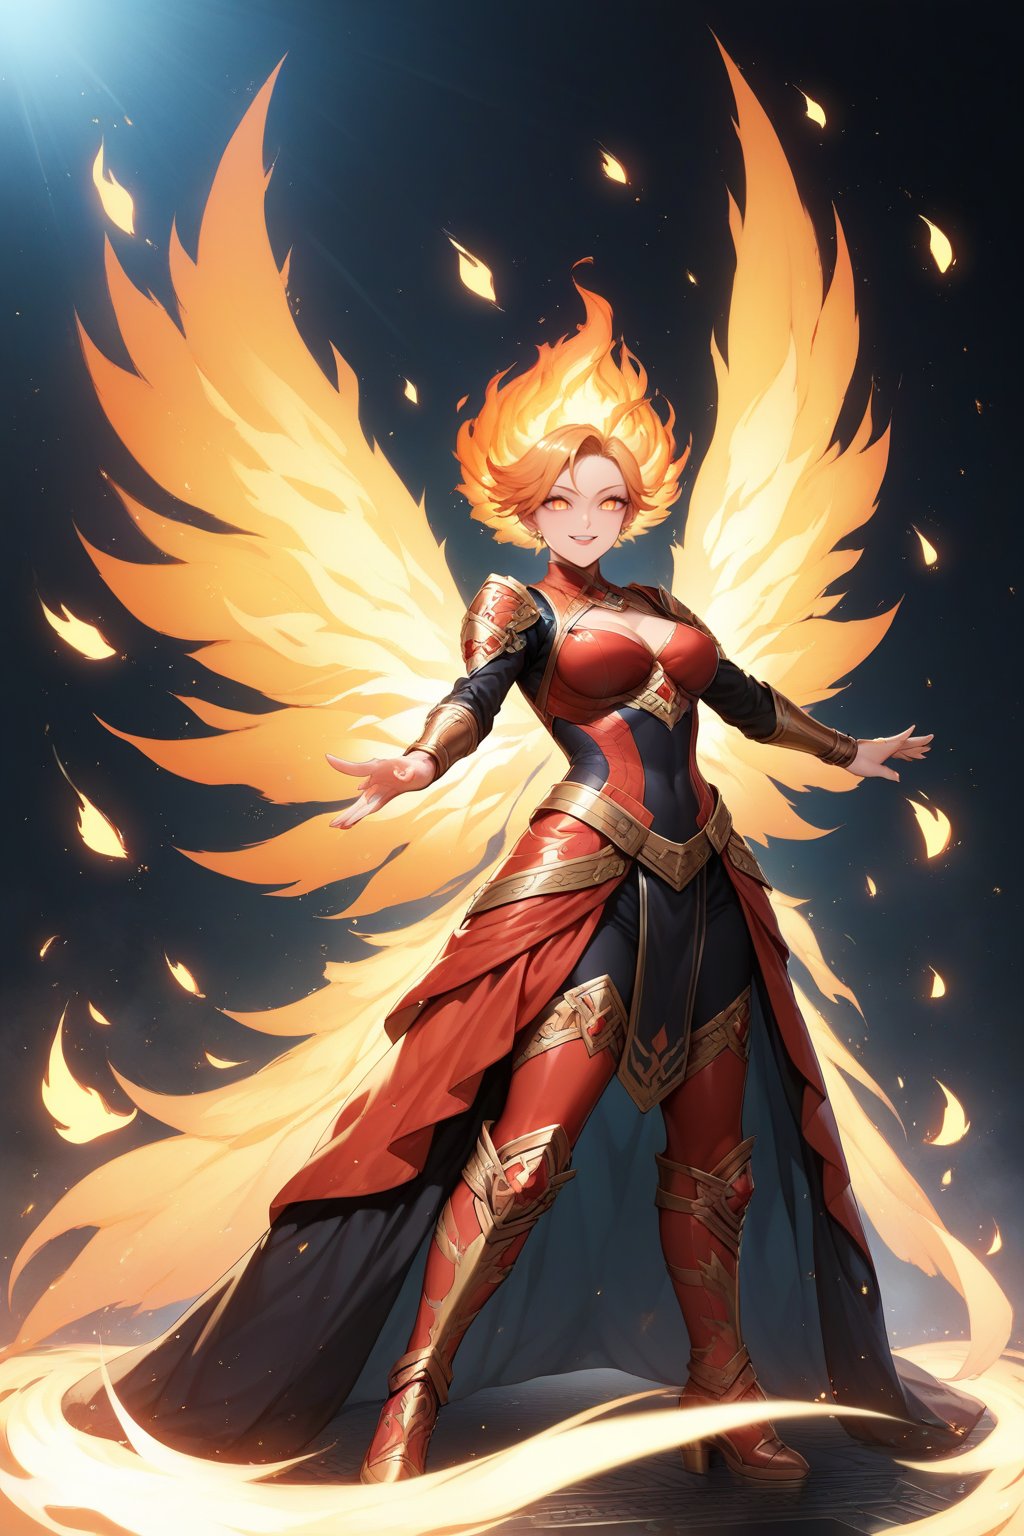 Score_9, Score_8_up, Score_7_up, Score_6_up, Score_5_up, Score_4_up, masterpiece, best quality,
BREAK
1girl, solo, full_body, black background, FuturEvoLabFlame, FuturEvoLabgirl,
fire wings, glowing embers, intense flames, dynamic fire effects, vibrant orange and red, fiery aura, detailed fire particles, flame burst, dramatic lighting, ethereal glow